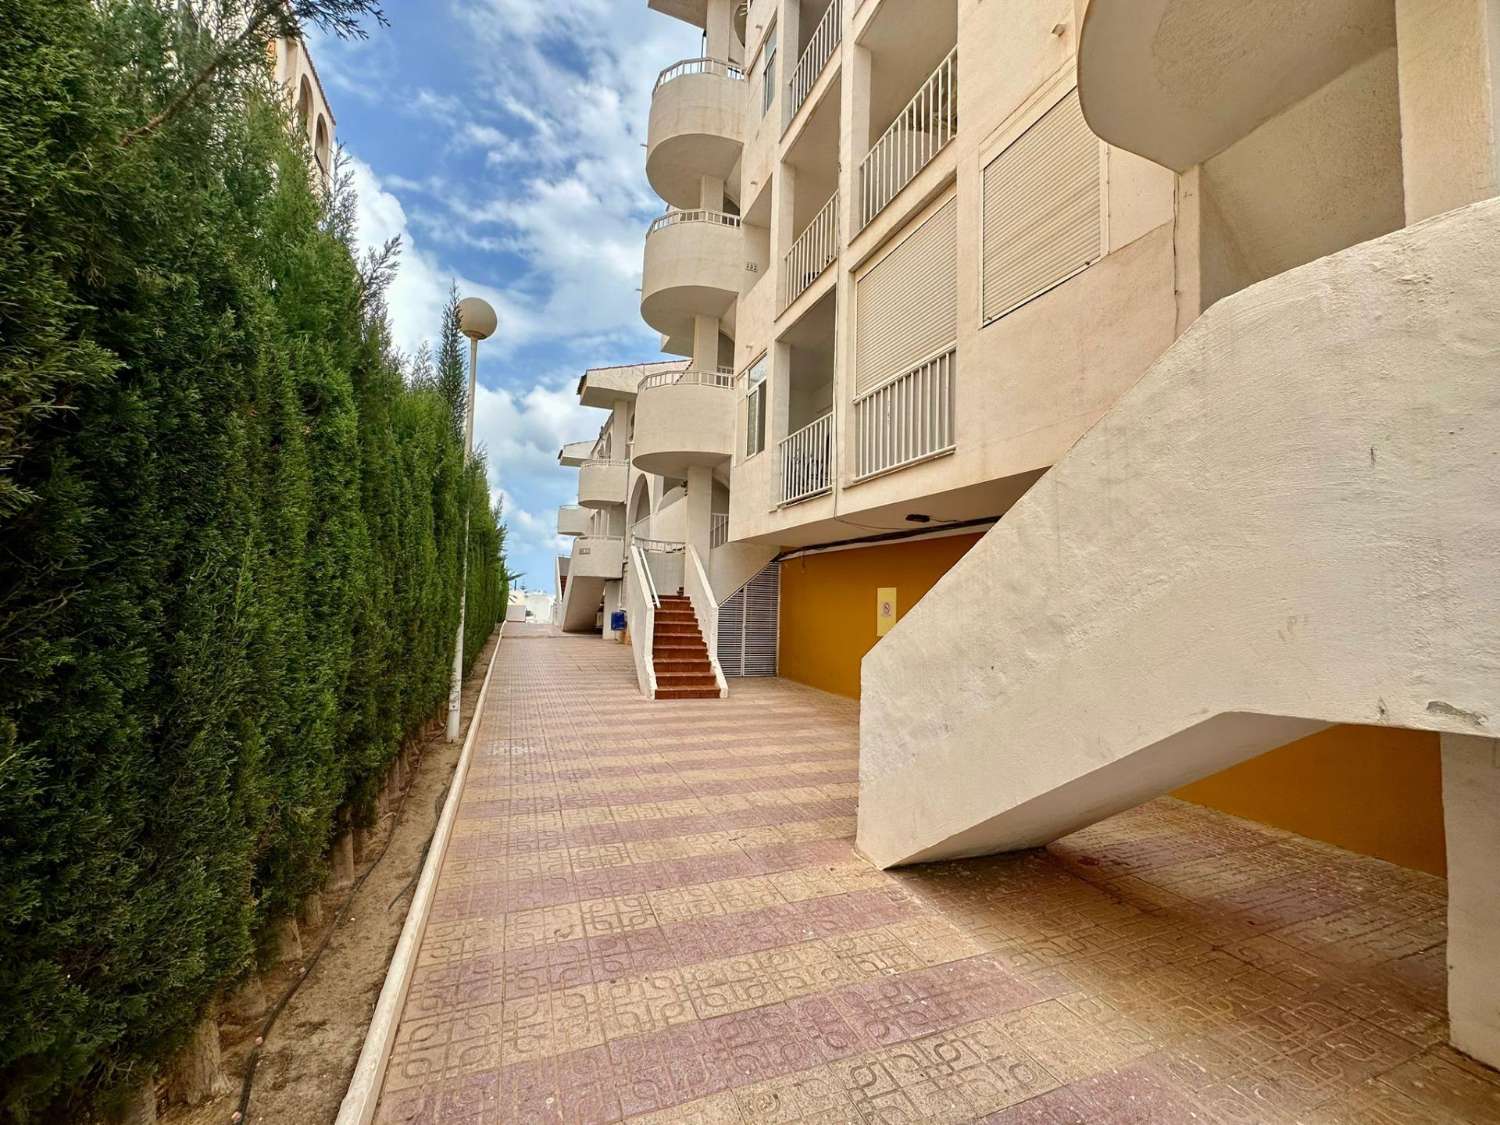 Live the beach dream with our residence with swimming pool just 200 meters away! TORREVIEJA